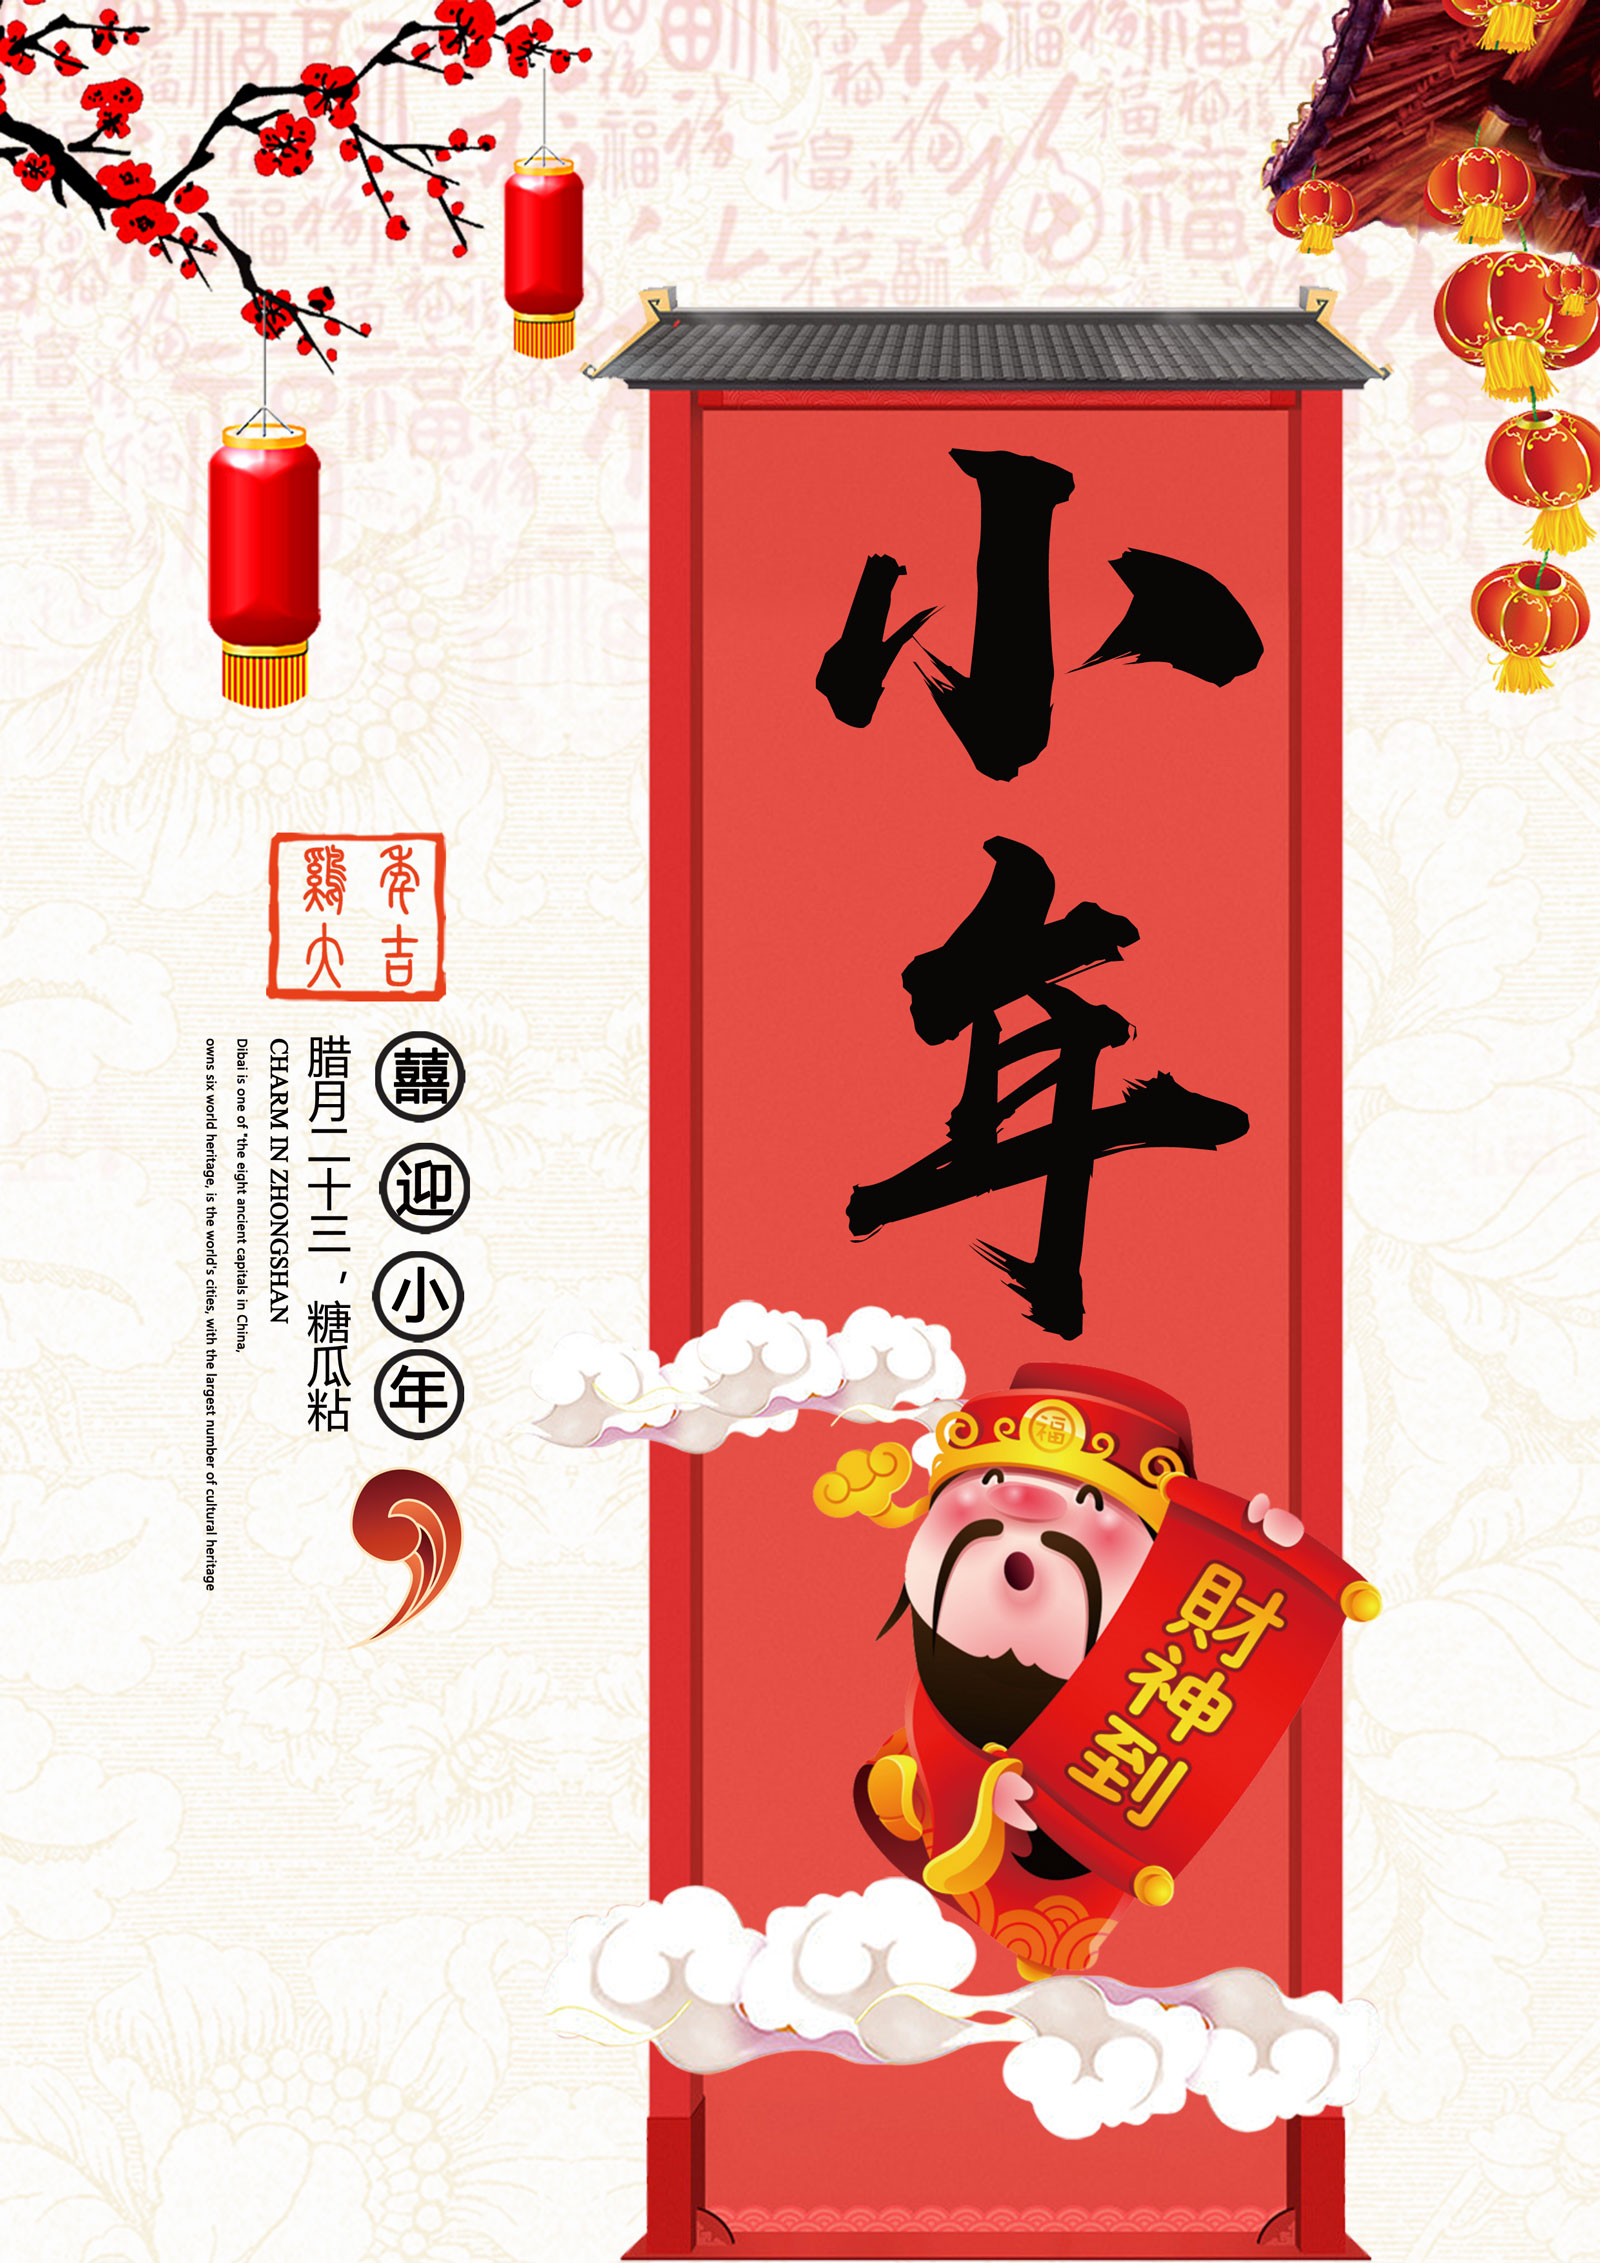 The Chinese New Year poster design PSD File Free Download